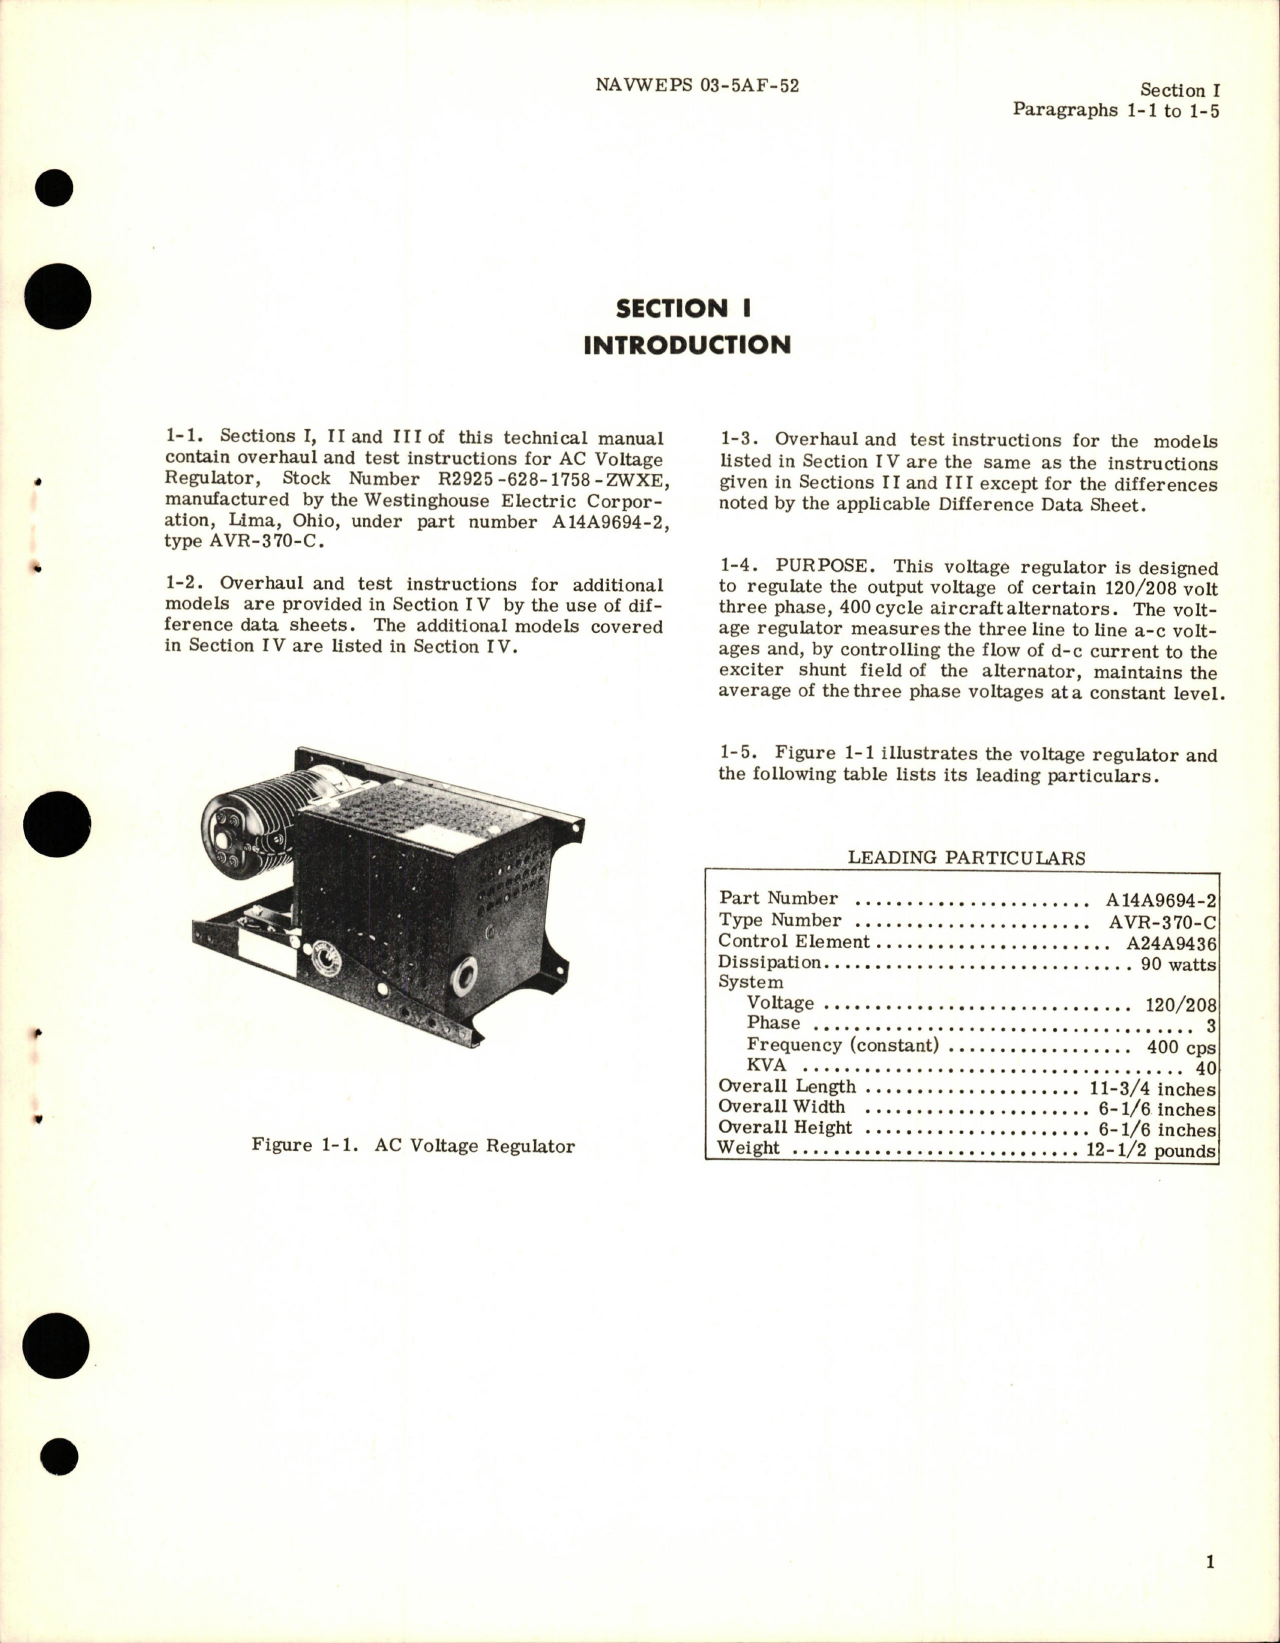 Sample page 5 from AirCorps Library document: Overhaul Instructions for A-C Voltage Regulator - Part A14A9694-2 